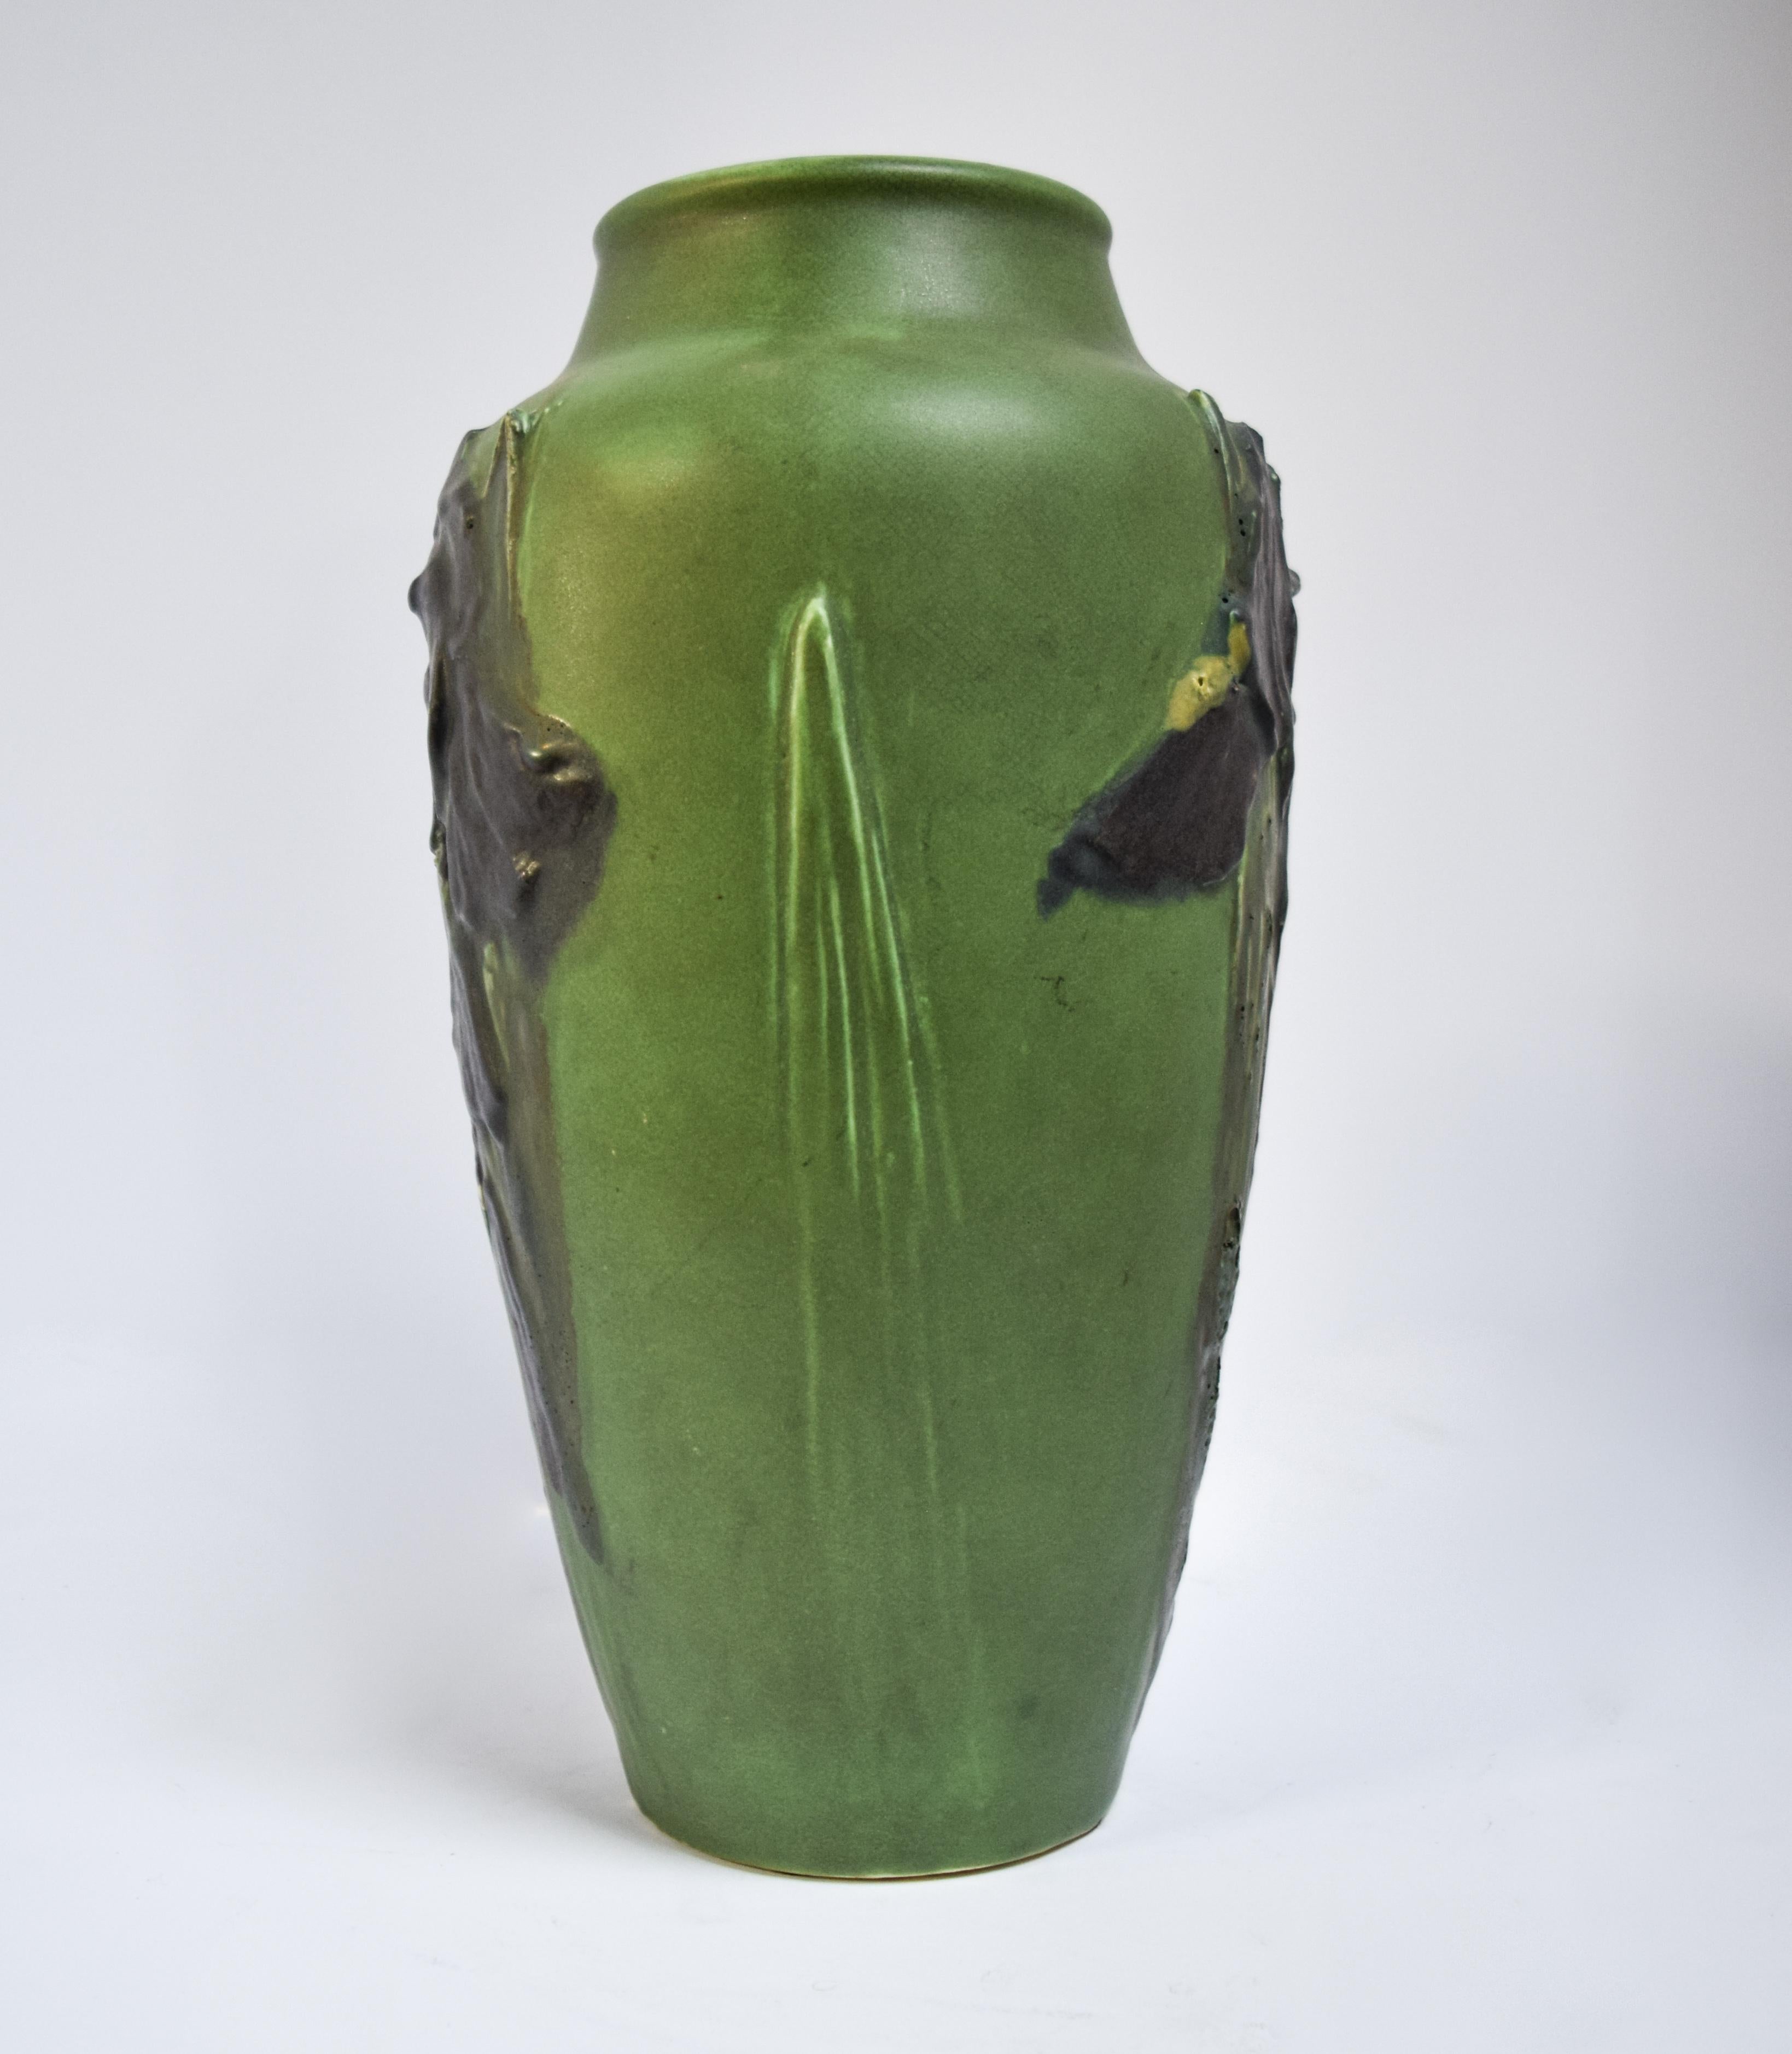 A staple of American pottery, the work of Albert Pons was a major influence on the Rookwood Pottery Company at the turn of the century during the Arts & Crafts movement. Crafted in 1905, this vase is a fabulous green adorned with purple iris’ in